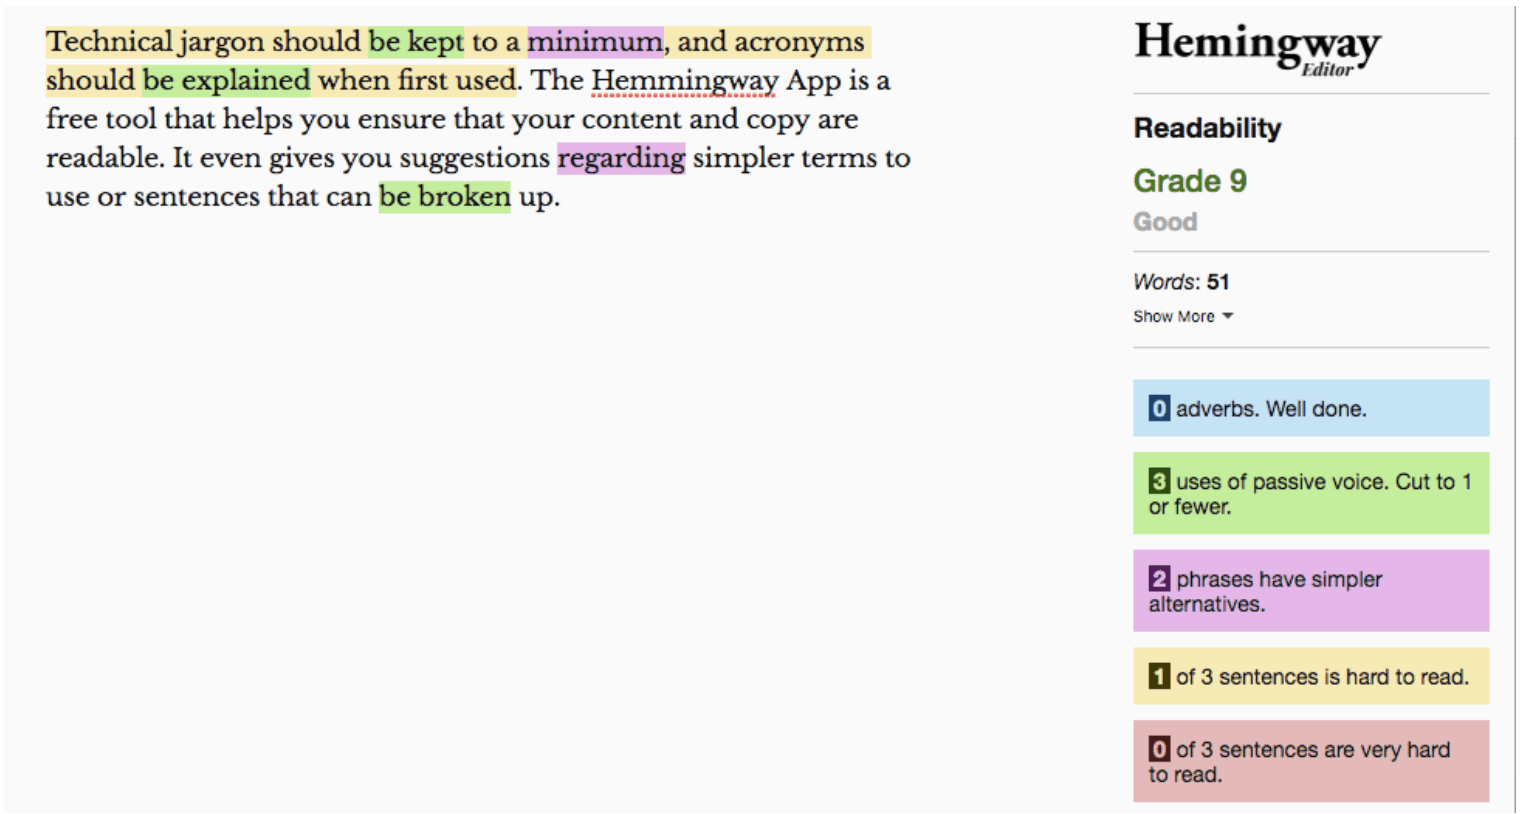 The hemmingway app is a free tool that helps you make content and copy more readable. - kanaan & co.